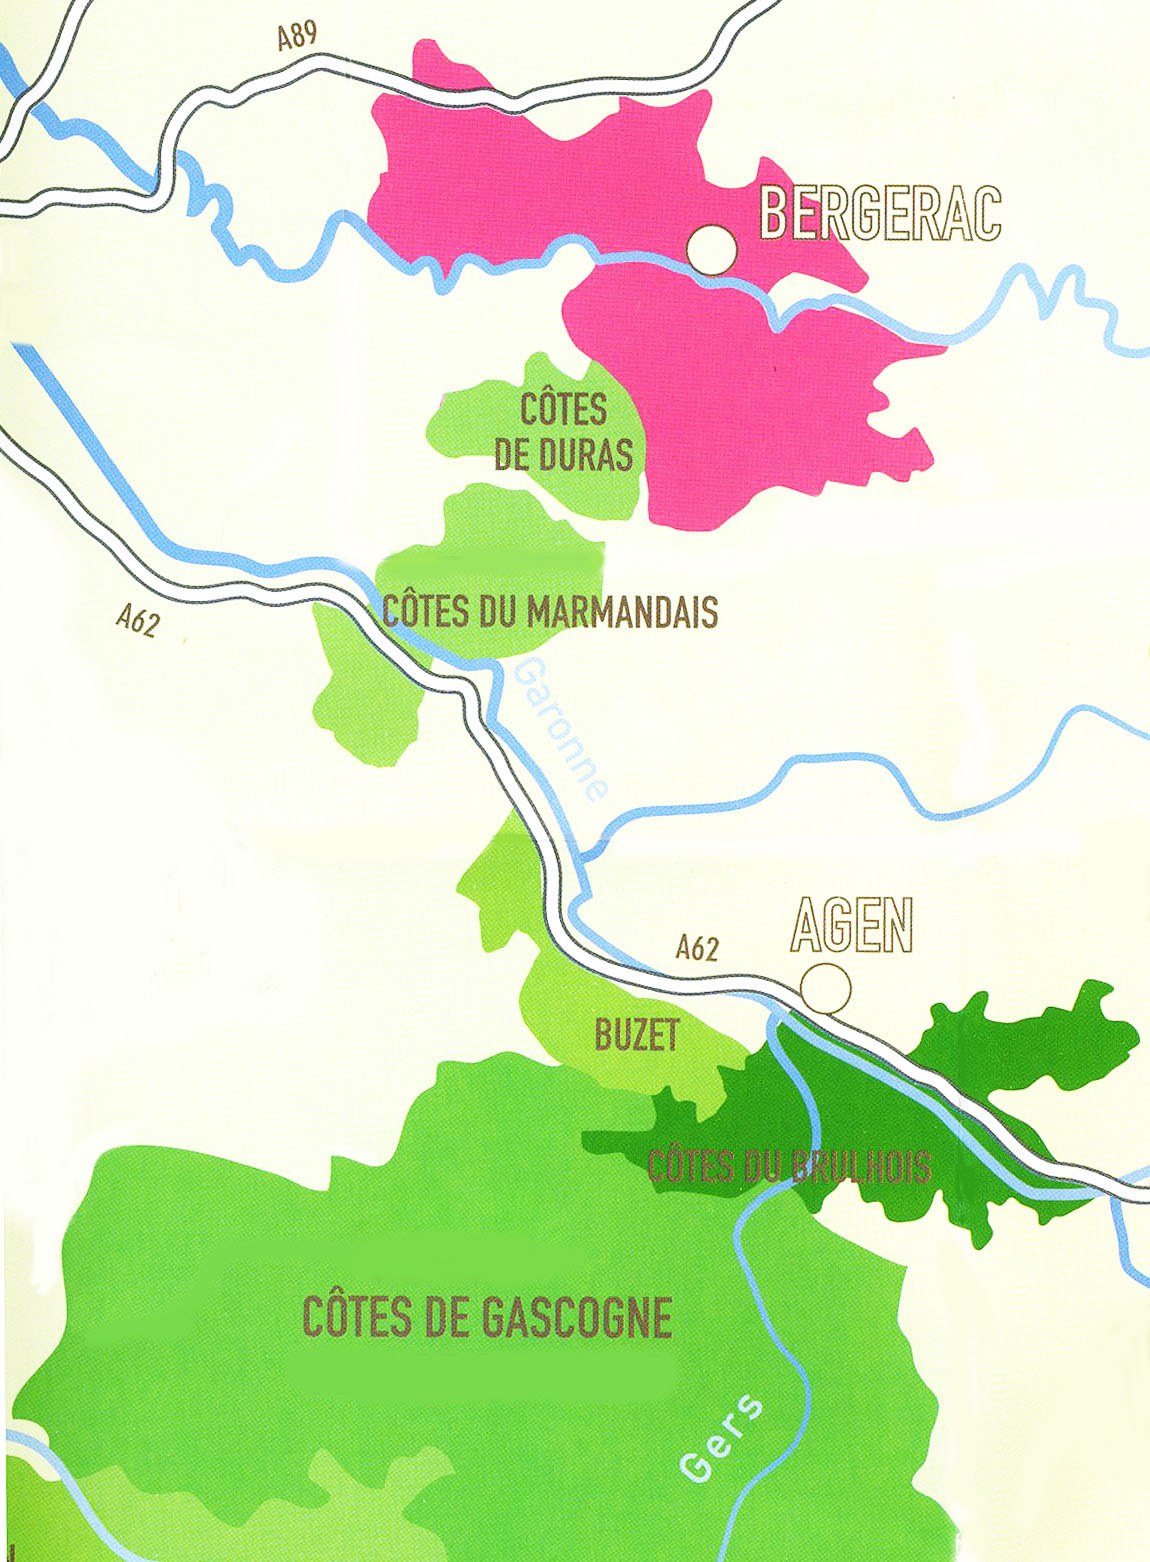 Beyond Bordeaux Satellites: From - Bergerac International GuildSomm Gascony Neal - Feature - to Charles Articles